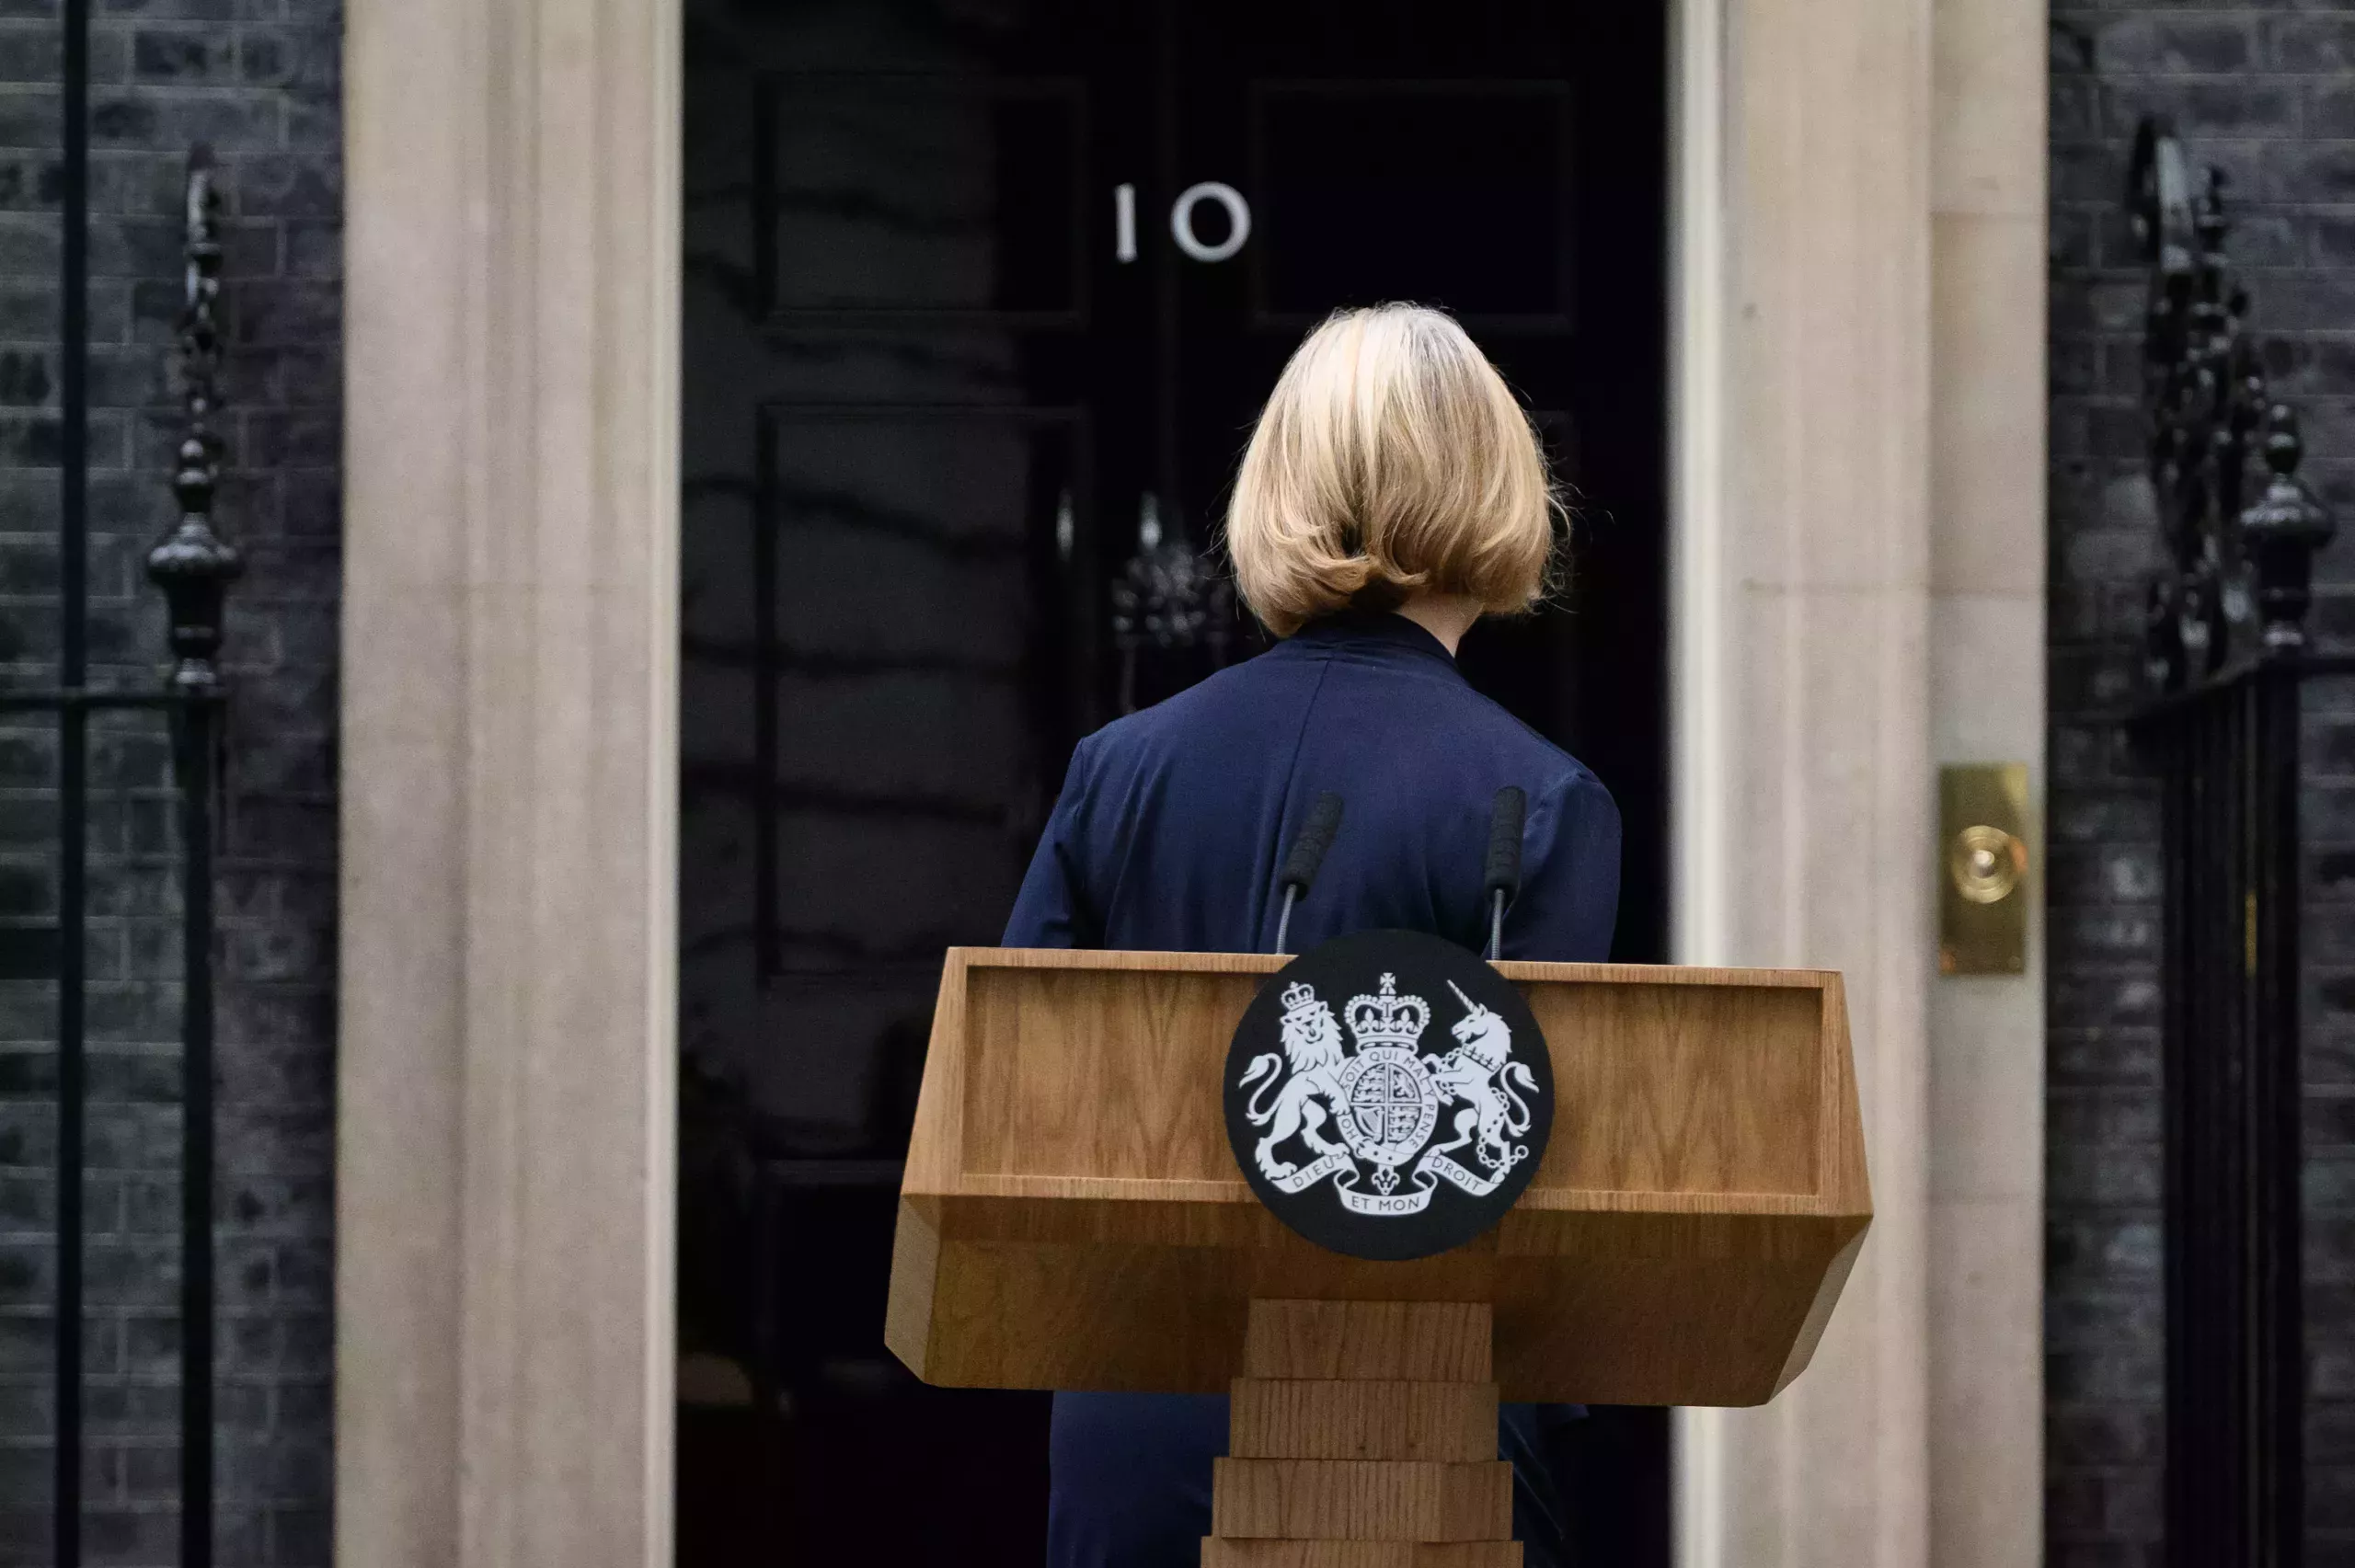 A shot of Liz Truss leaving her lectern in front of 10 Downing Street. Truss' back is turned to the camera.